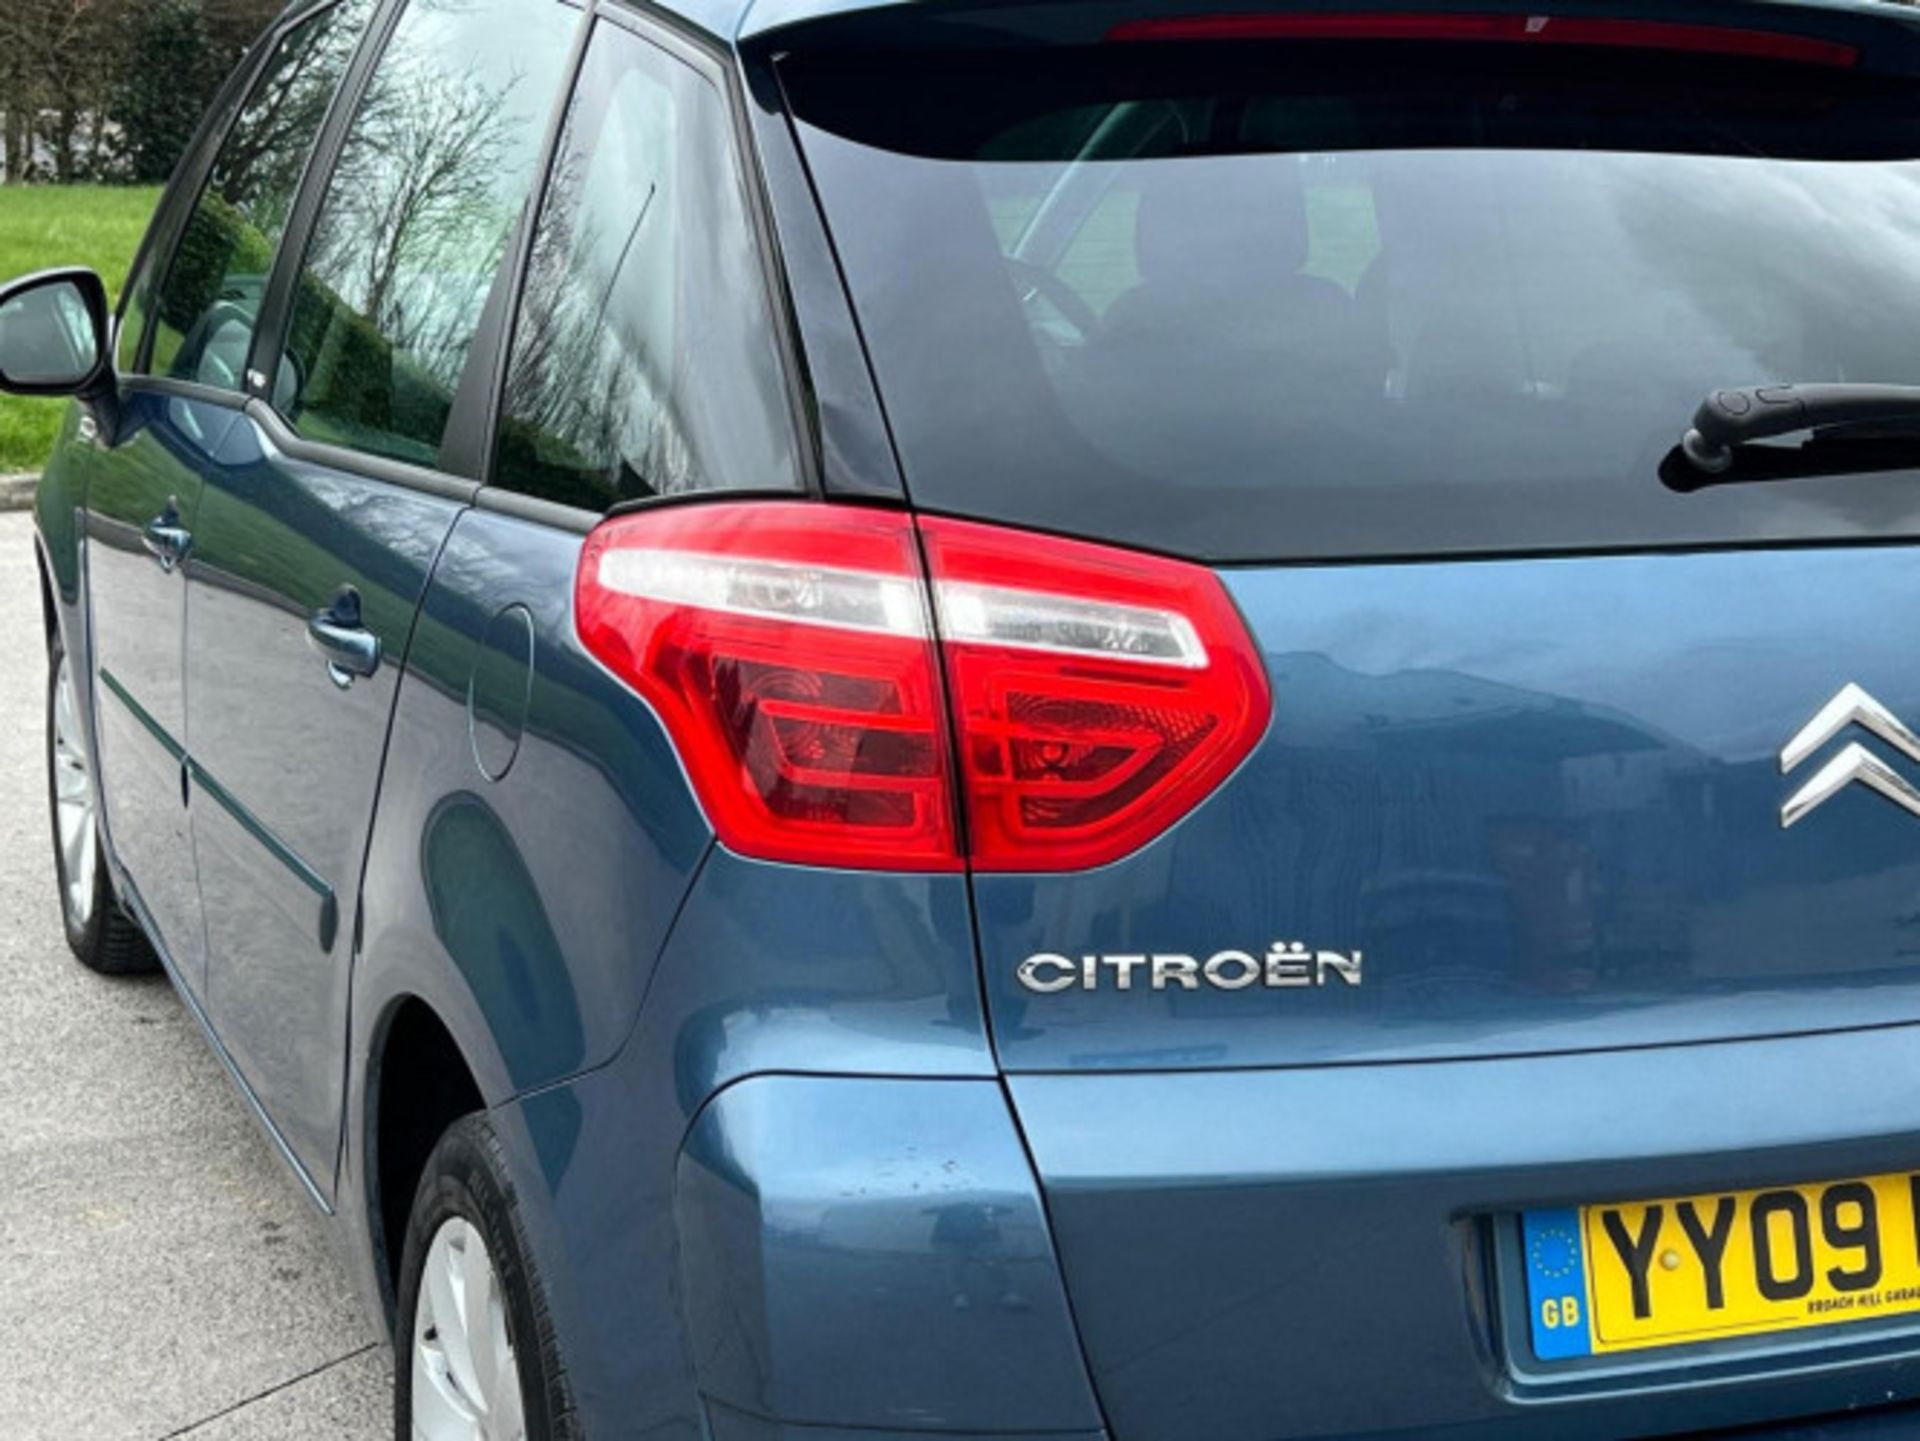 2009 CITROEN C4 PICASSO 1.6 HDI VTR+ EGS6 5DR >>--NO VAT ON HAMMER--<< - Image 102 of 123